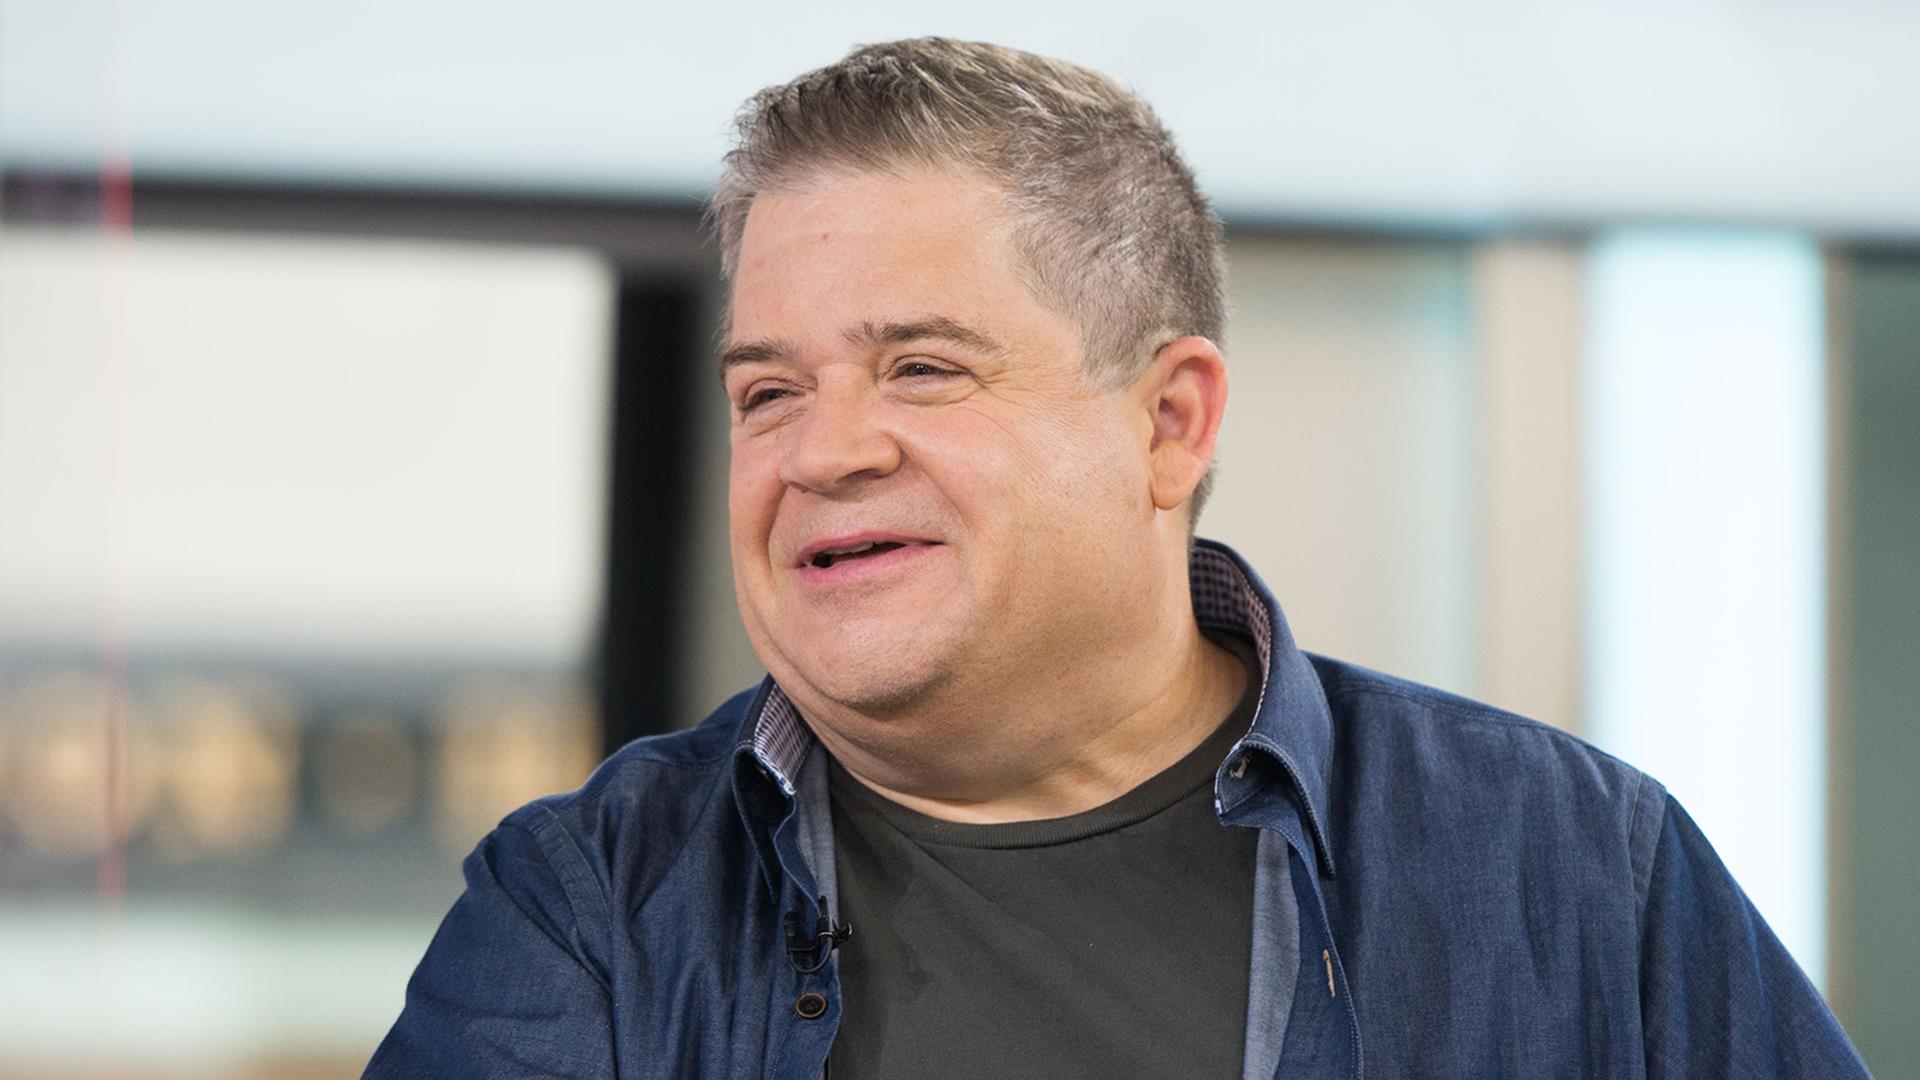 Patton Oswalt on new thriller ‘The Circle,’ Tom Hanks and ‘MST3K’ - TODAY.com1920 x 1080